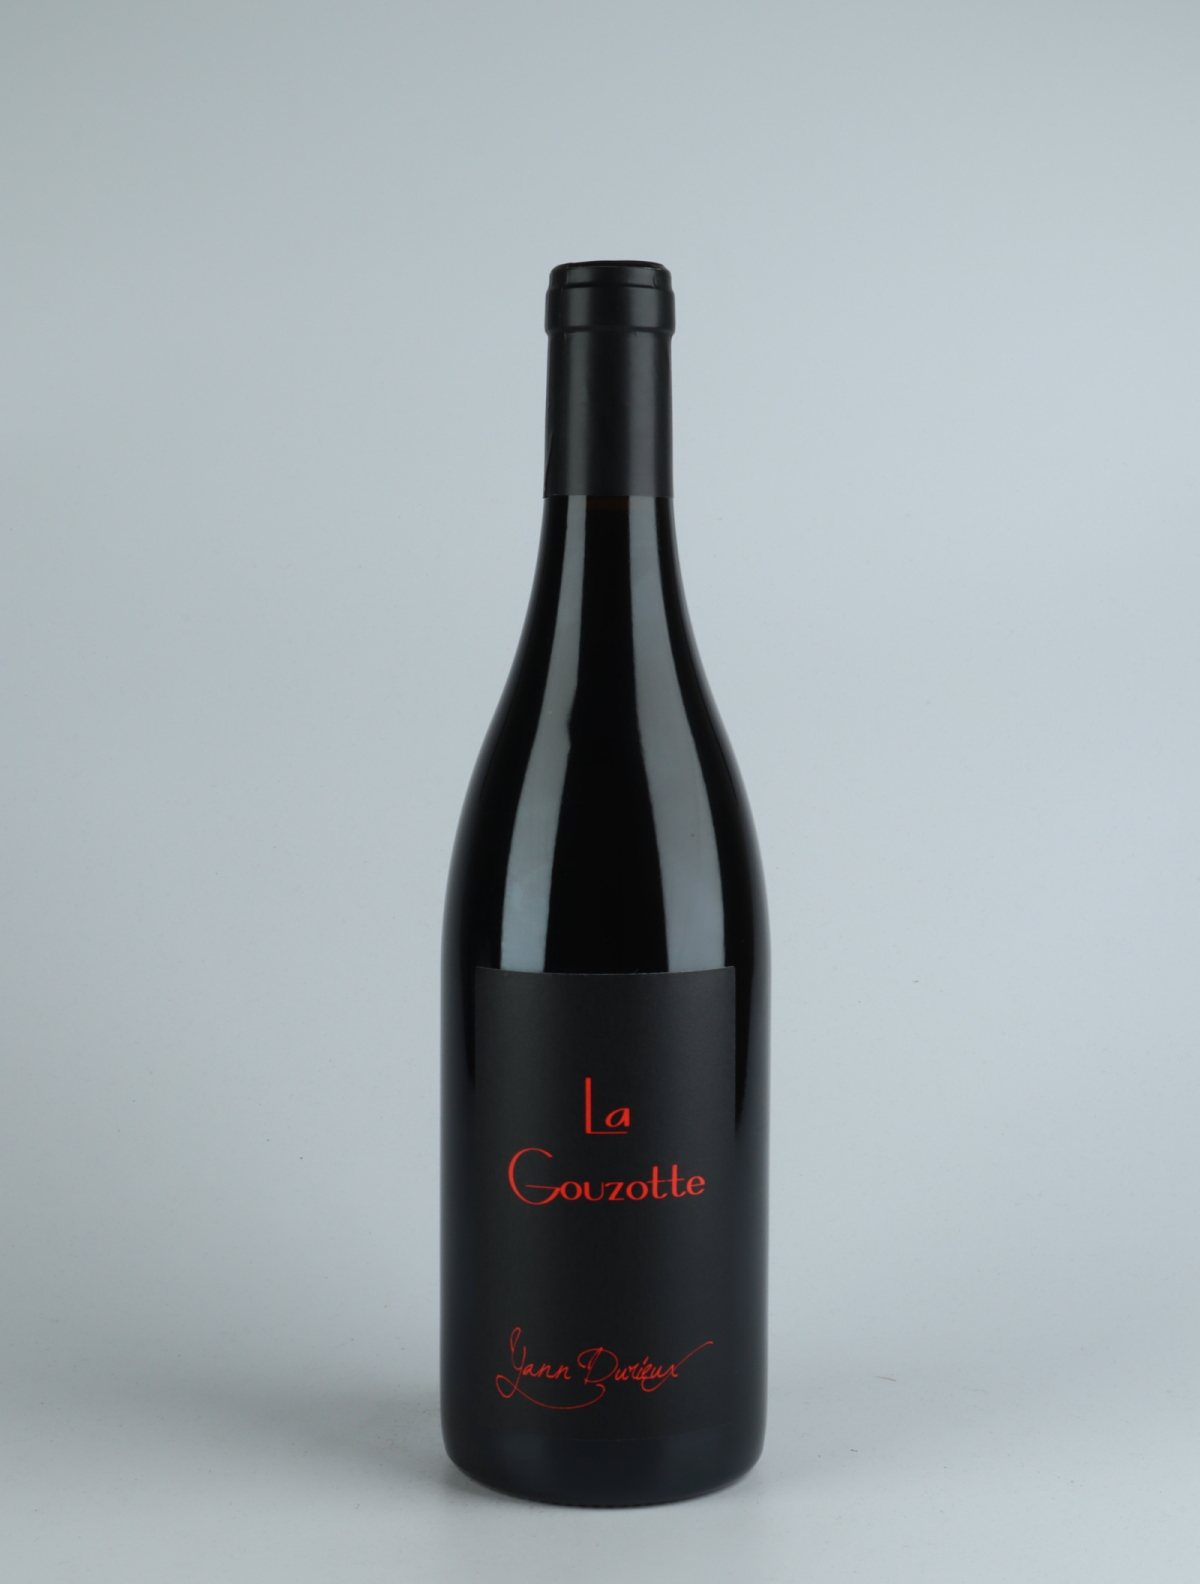 A bottle 2018 La Gouzotte Red wine from Yann Durieux, Burgundy in France